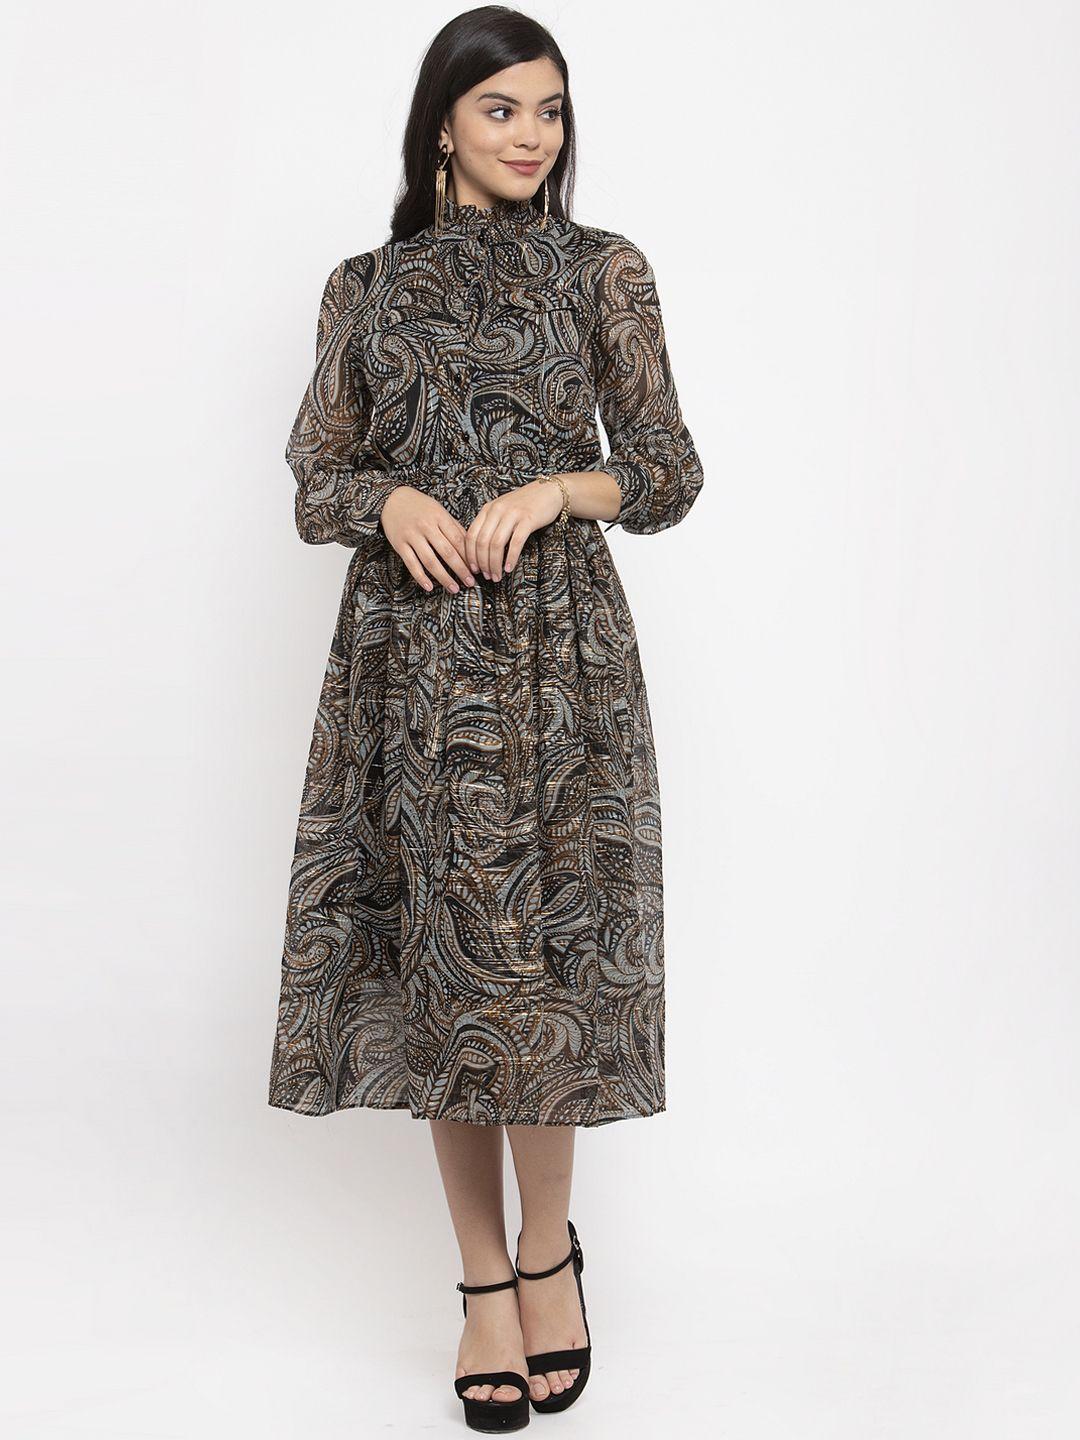 kassually women grey & black printed fit and flare dress